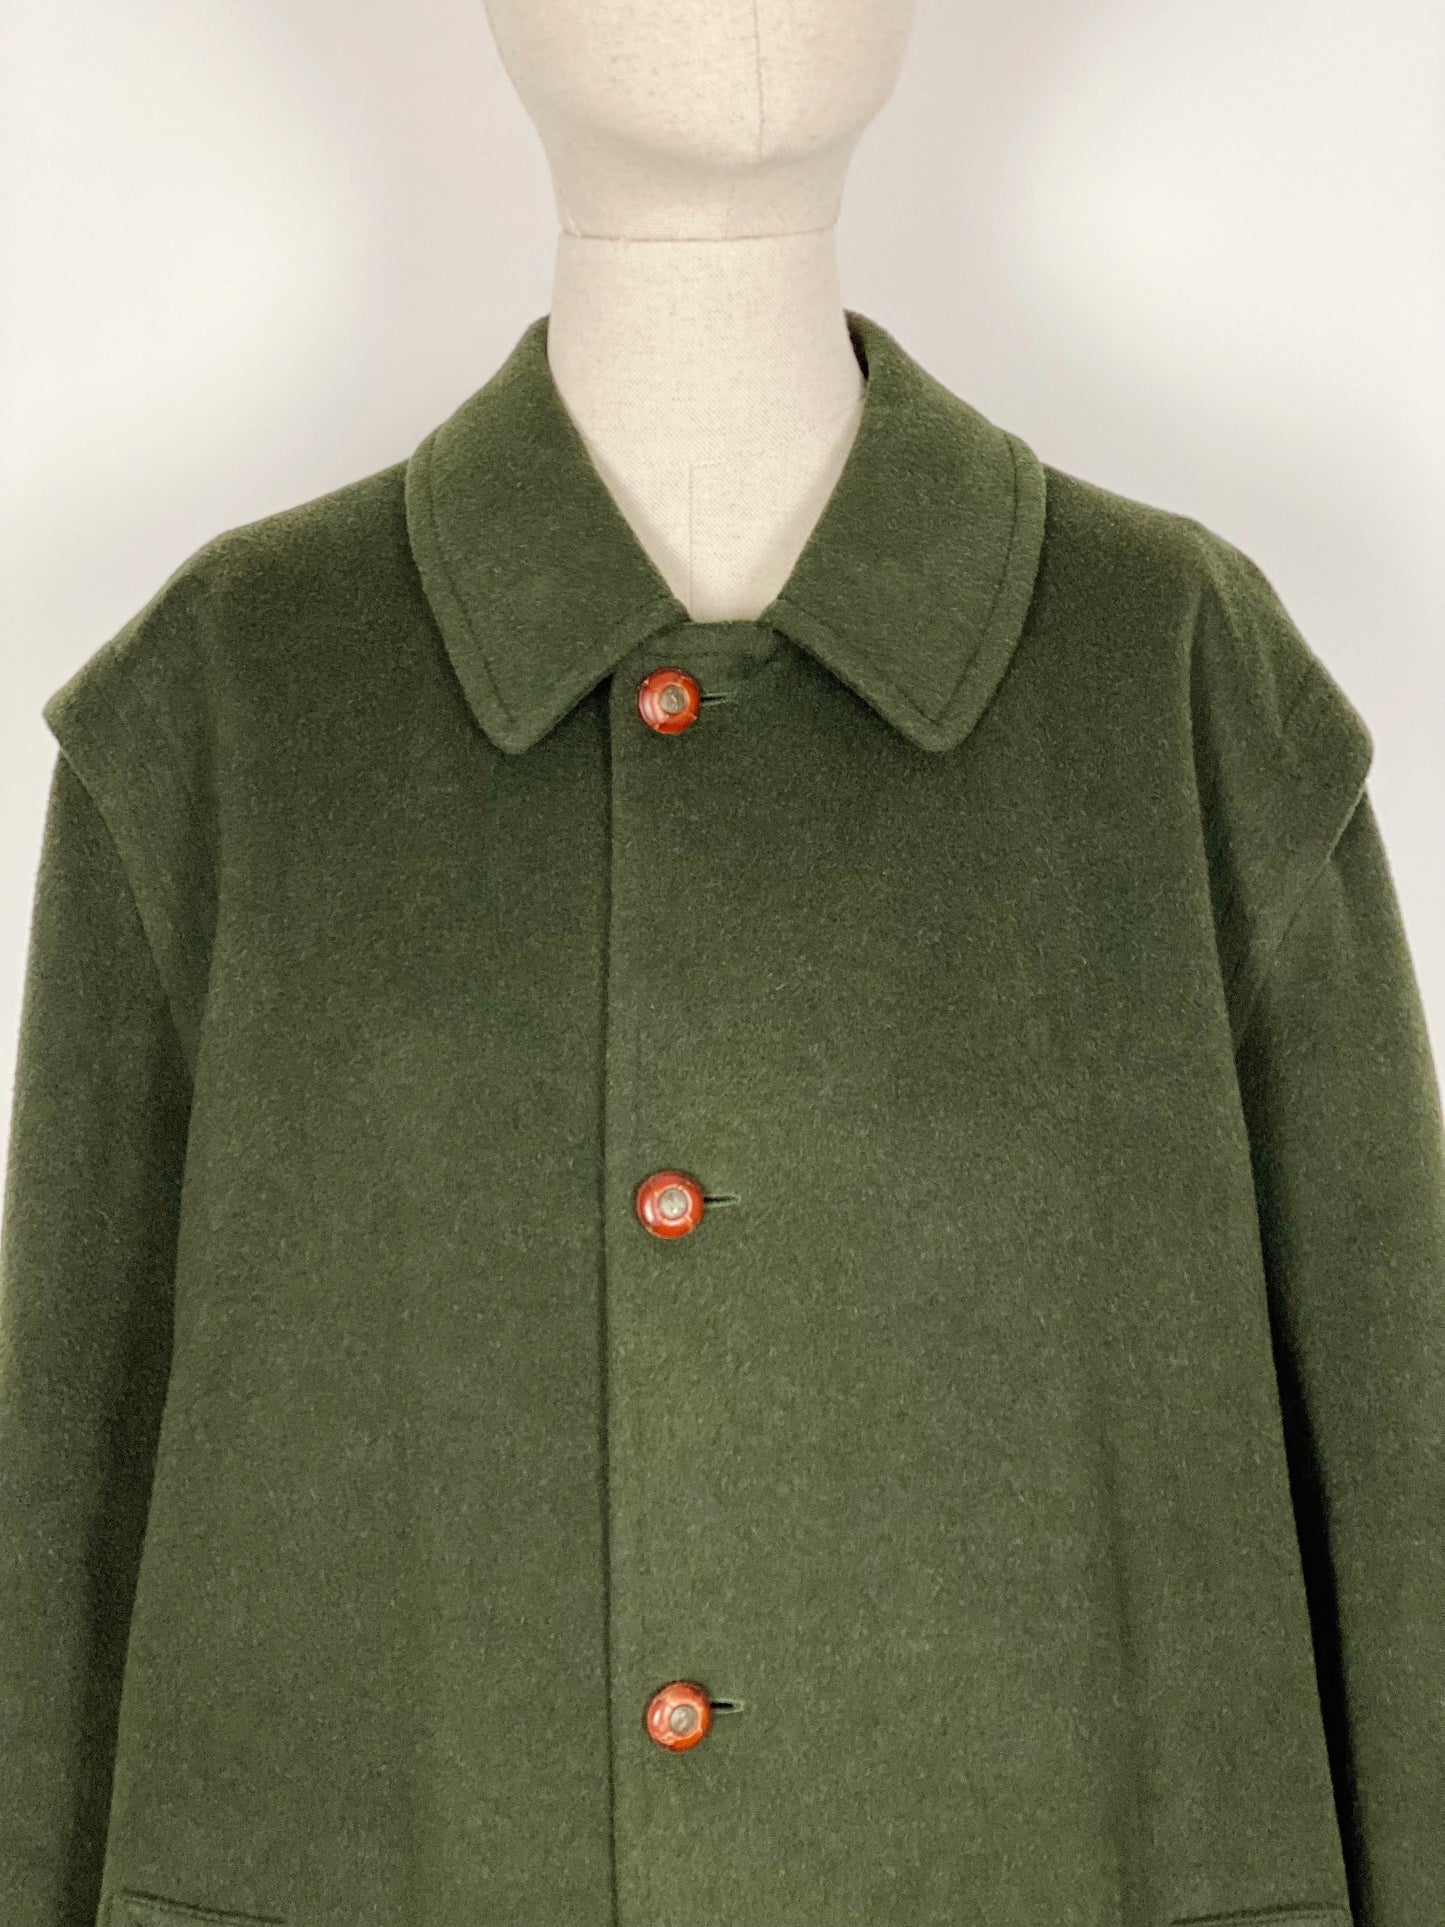 Vintage Green Loden by Yves Saint Laurent